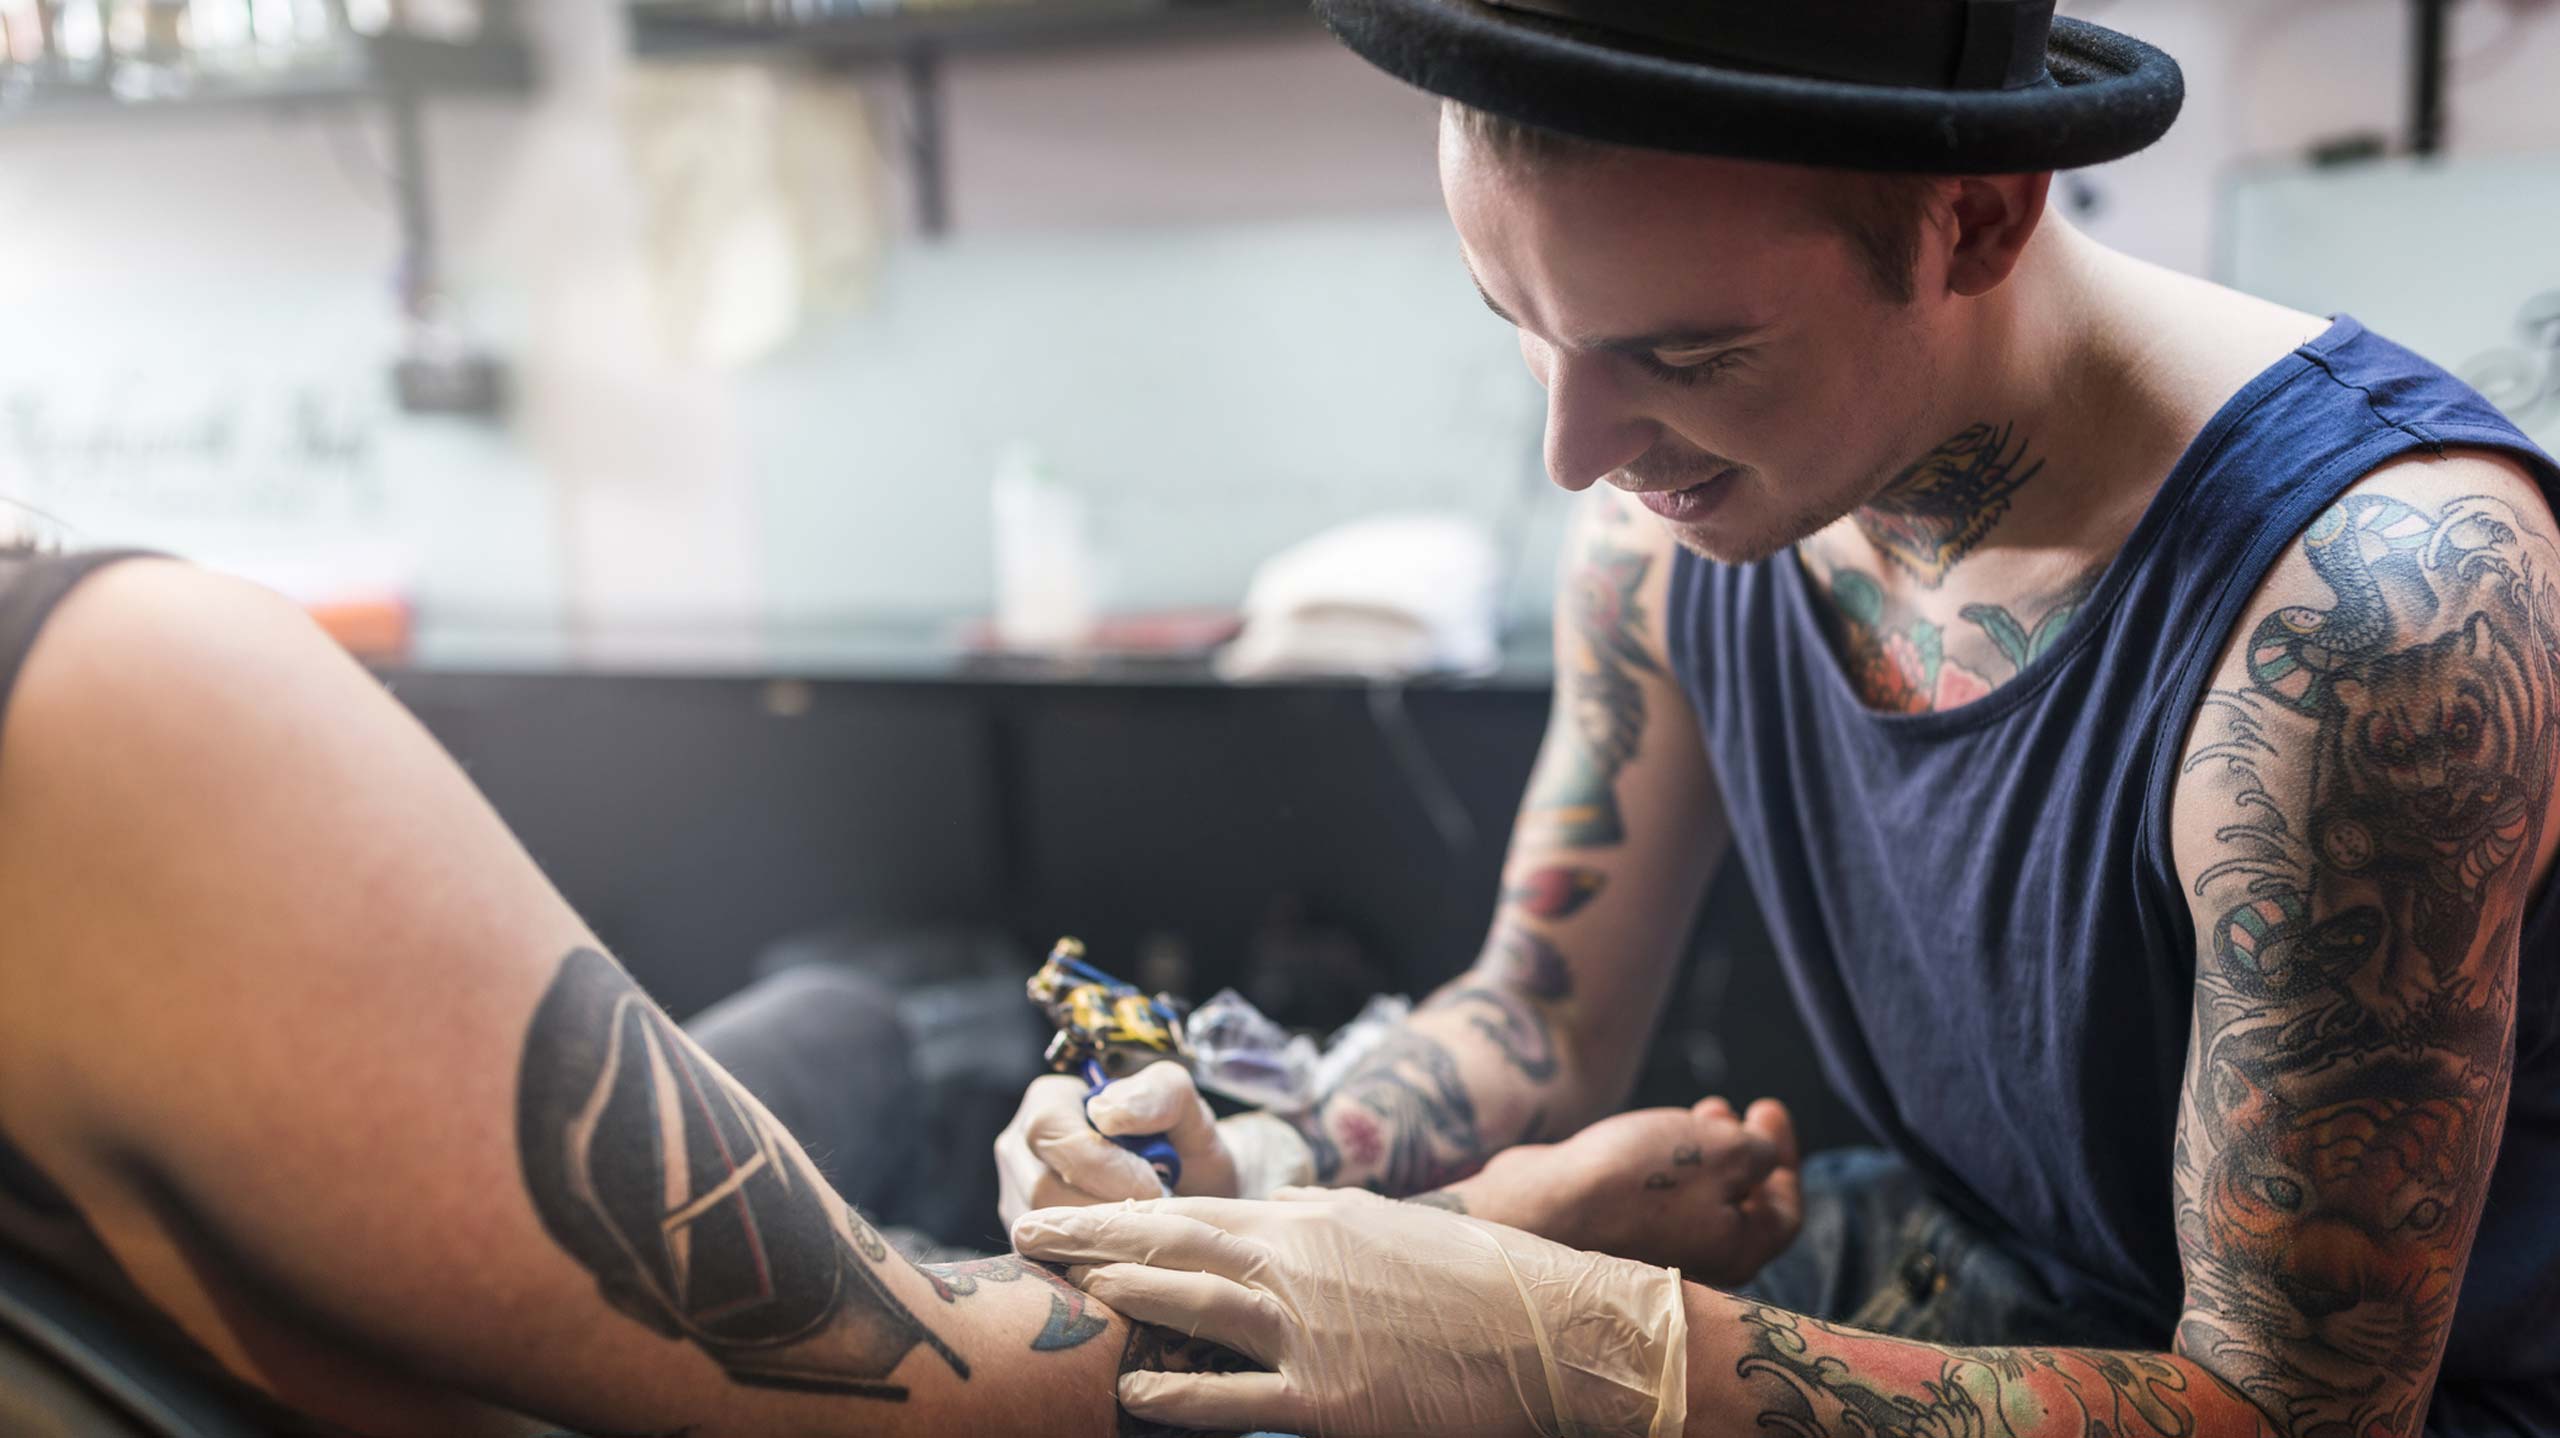 How Badly Do Tattoos Hurt? Here's What 11 Reddit Users Have to Say